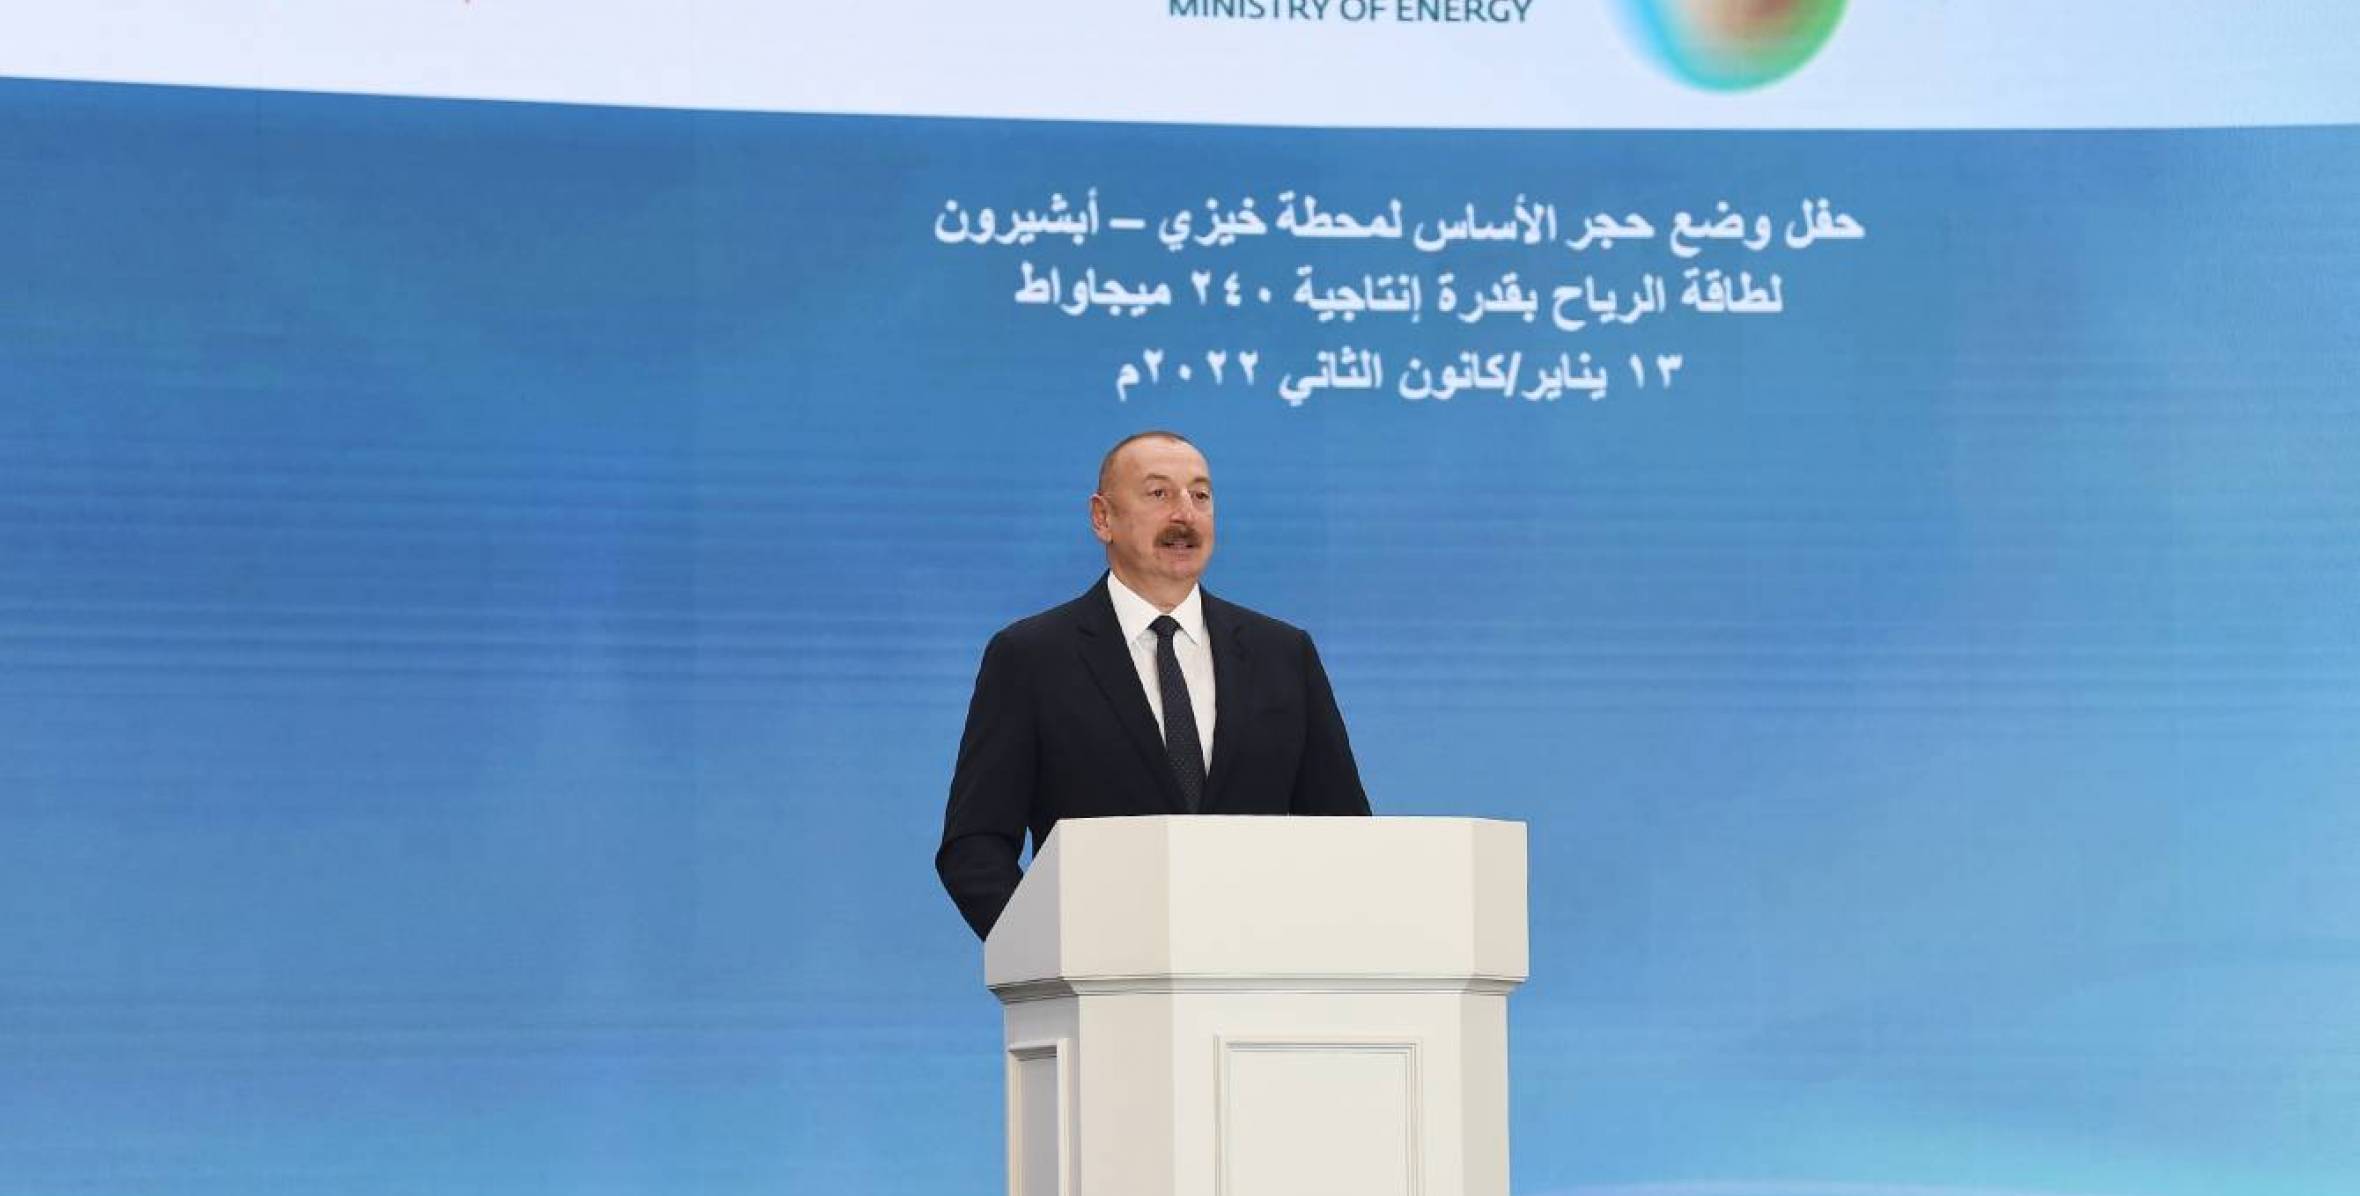 Speech by Ilham Aliyev  at the groundbreaking ceremony for “Khizi-Absheron” Wind Power Plant